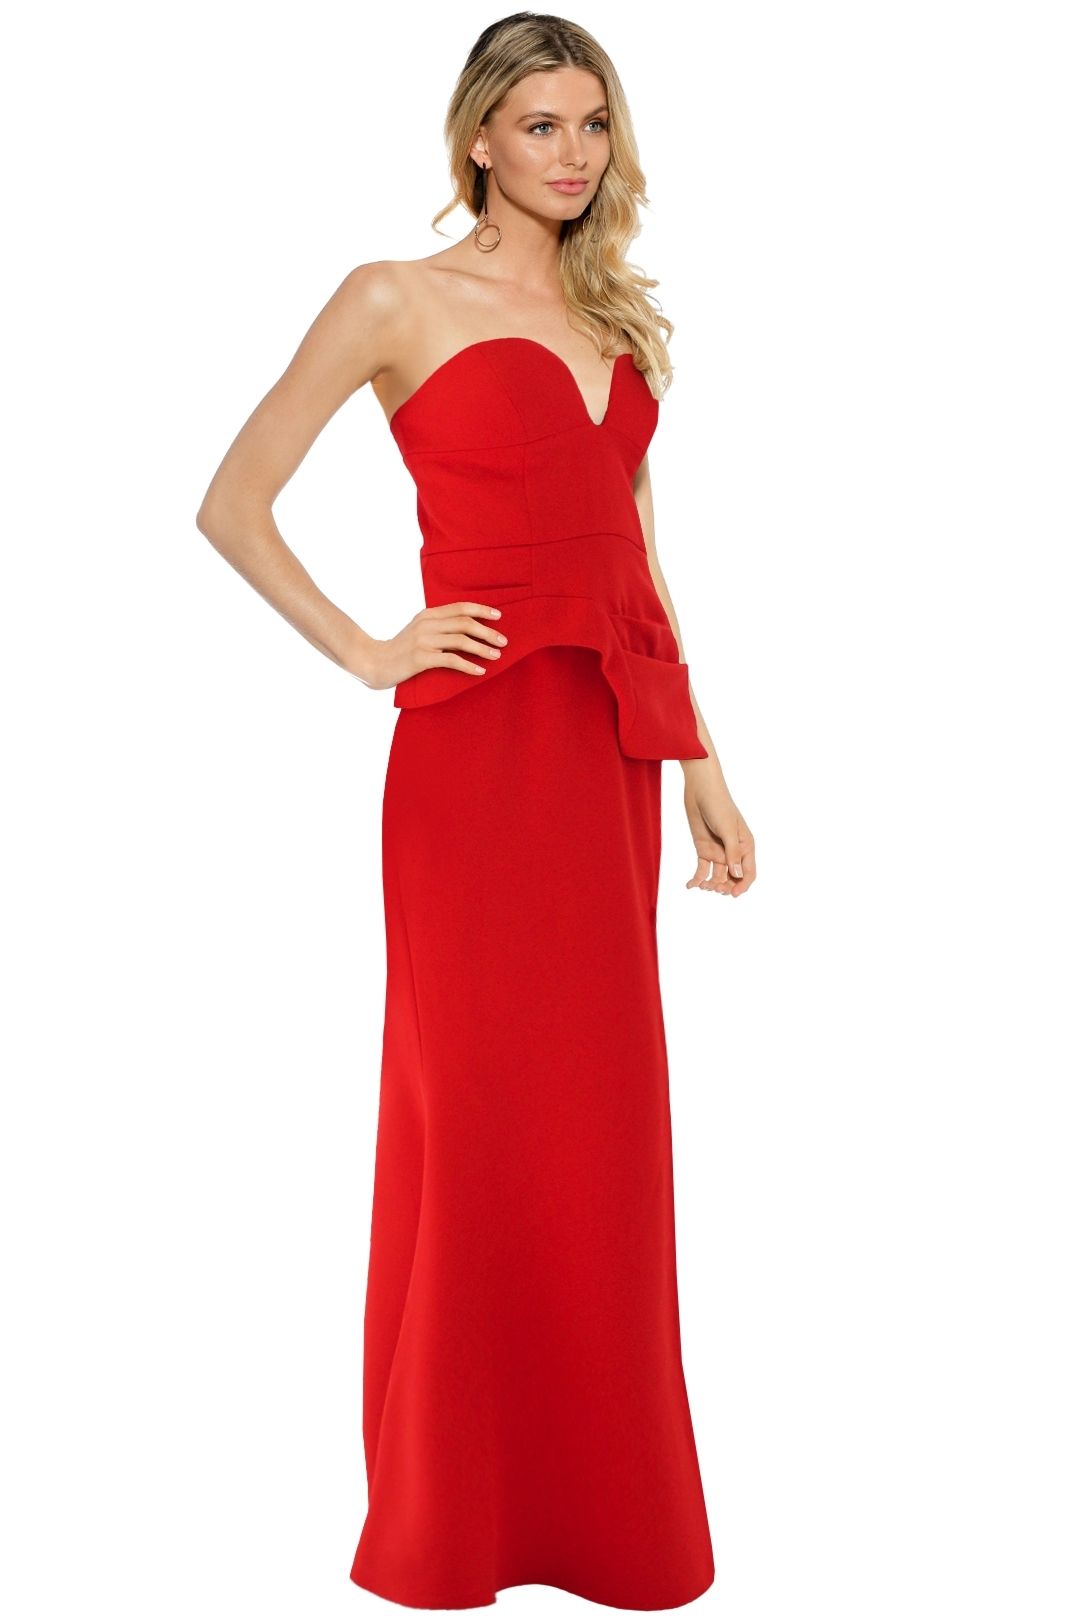 Queen of Hearts Maxi Dress by Sheike for Rent | GlamCorner